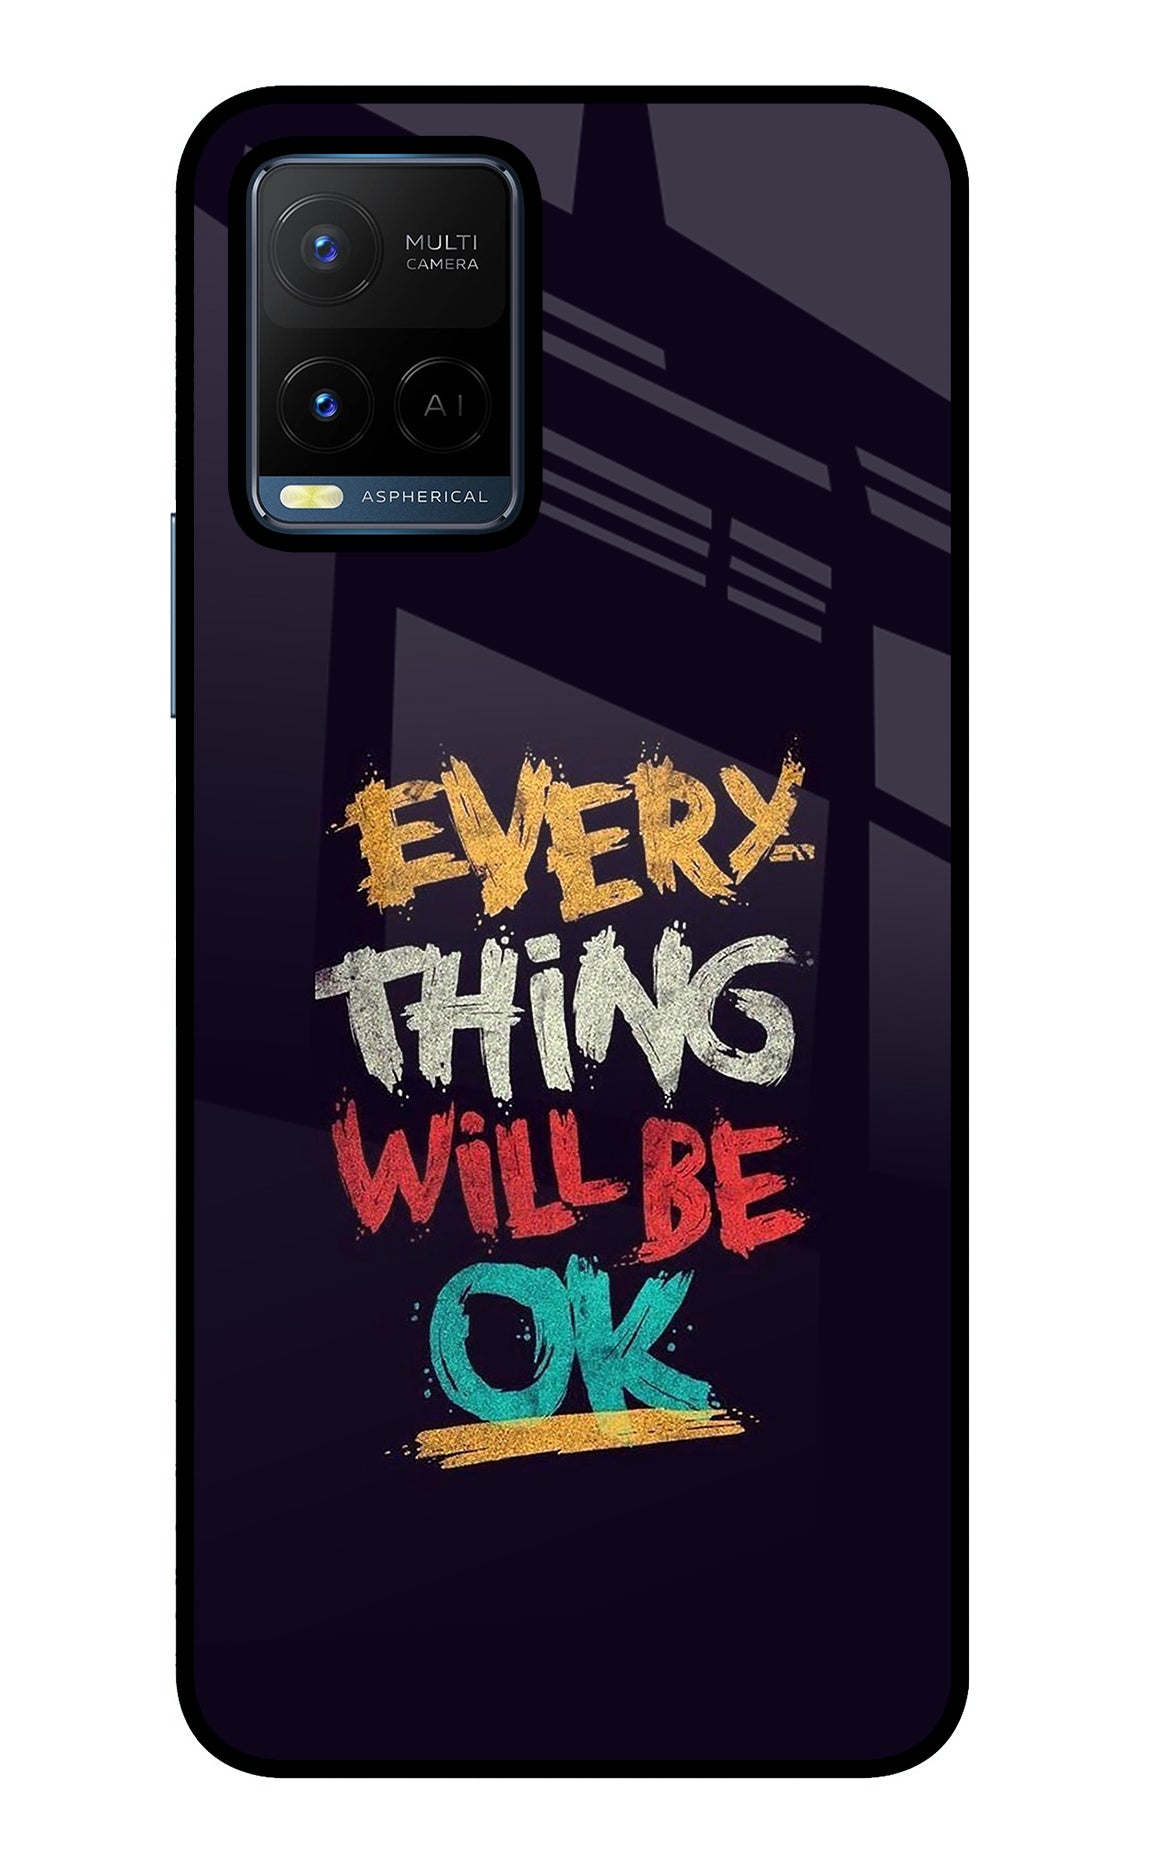 Everything Will Be Ok Vivo Y21/Y21s/Y33s Back Cover